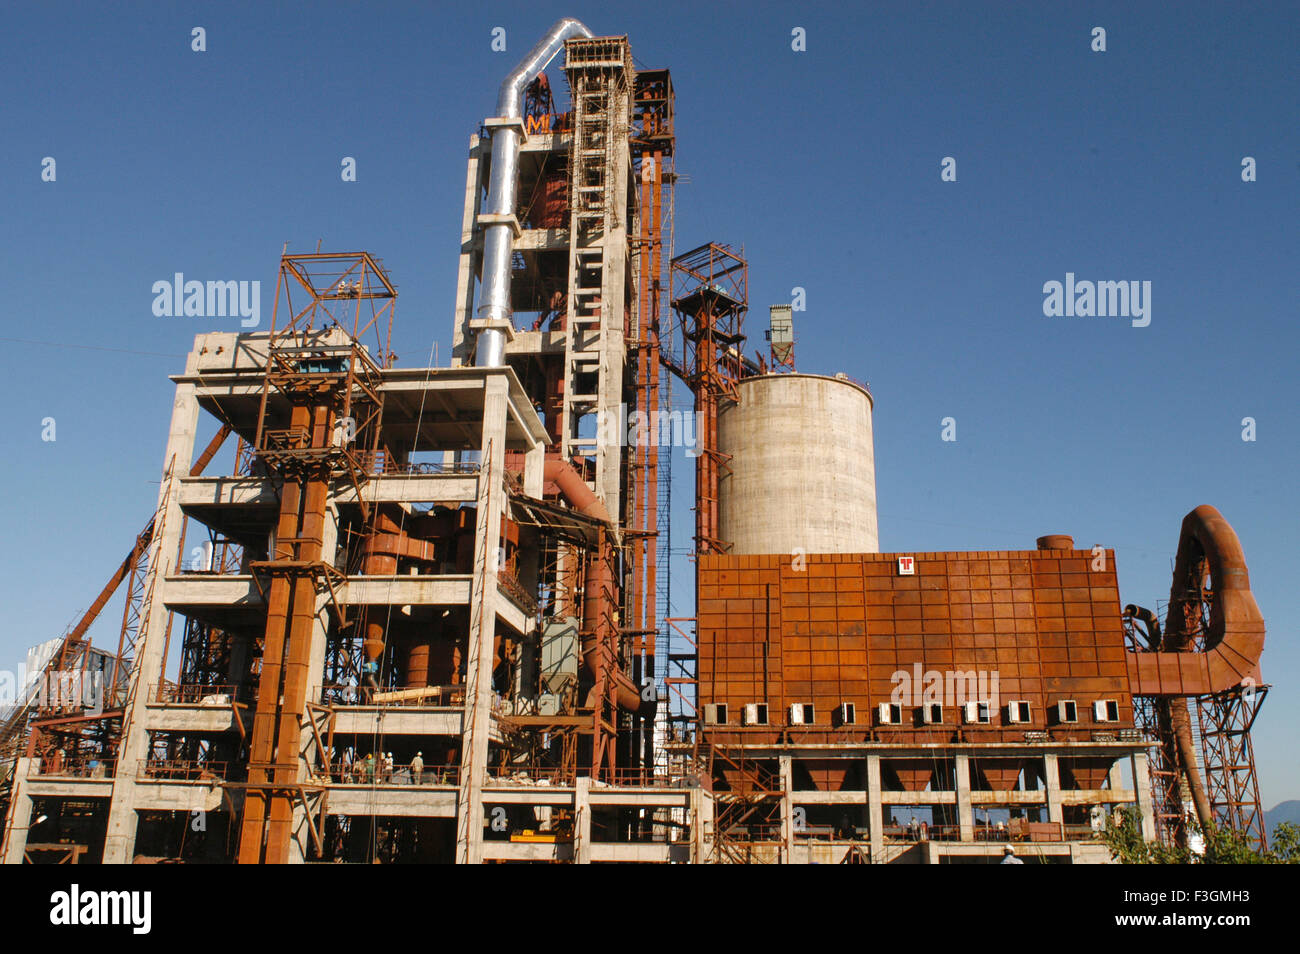 Cement plant in North Eastern State ; India Stock Photo: 88263199 - Alamy